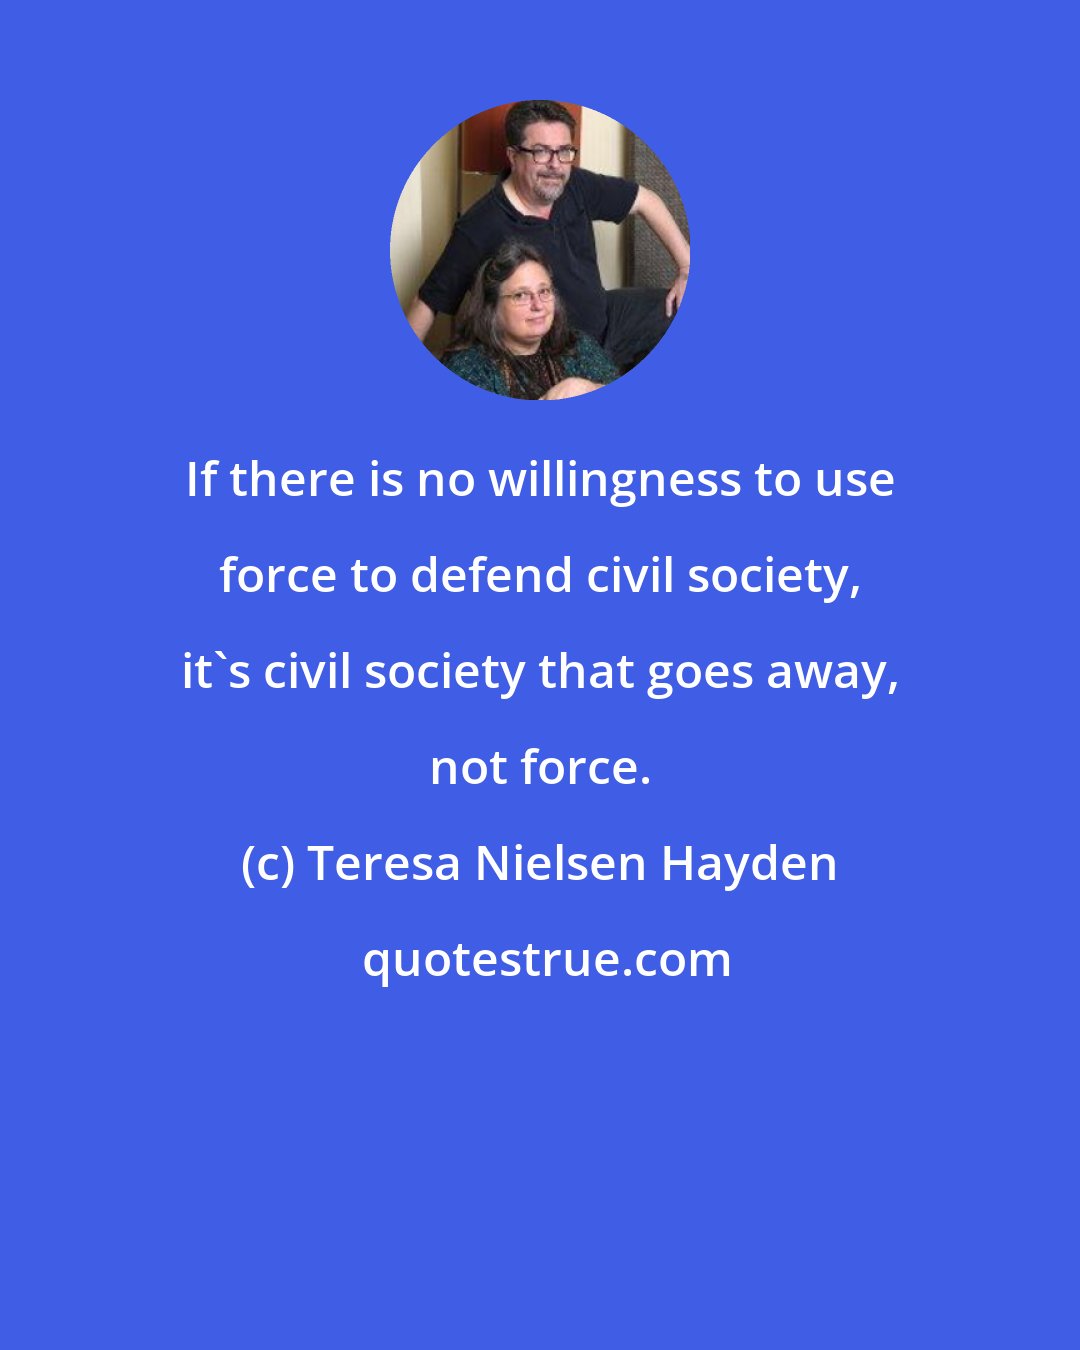 Teresa Nielsen Hayden: If there is no willingness to use force to defend civil society, it's civil society that goes away, not force.